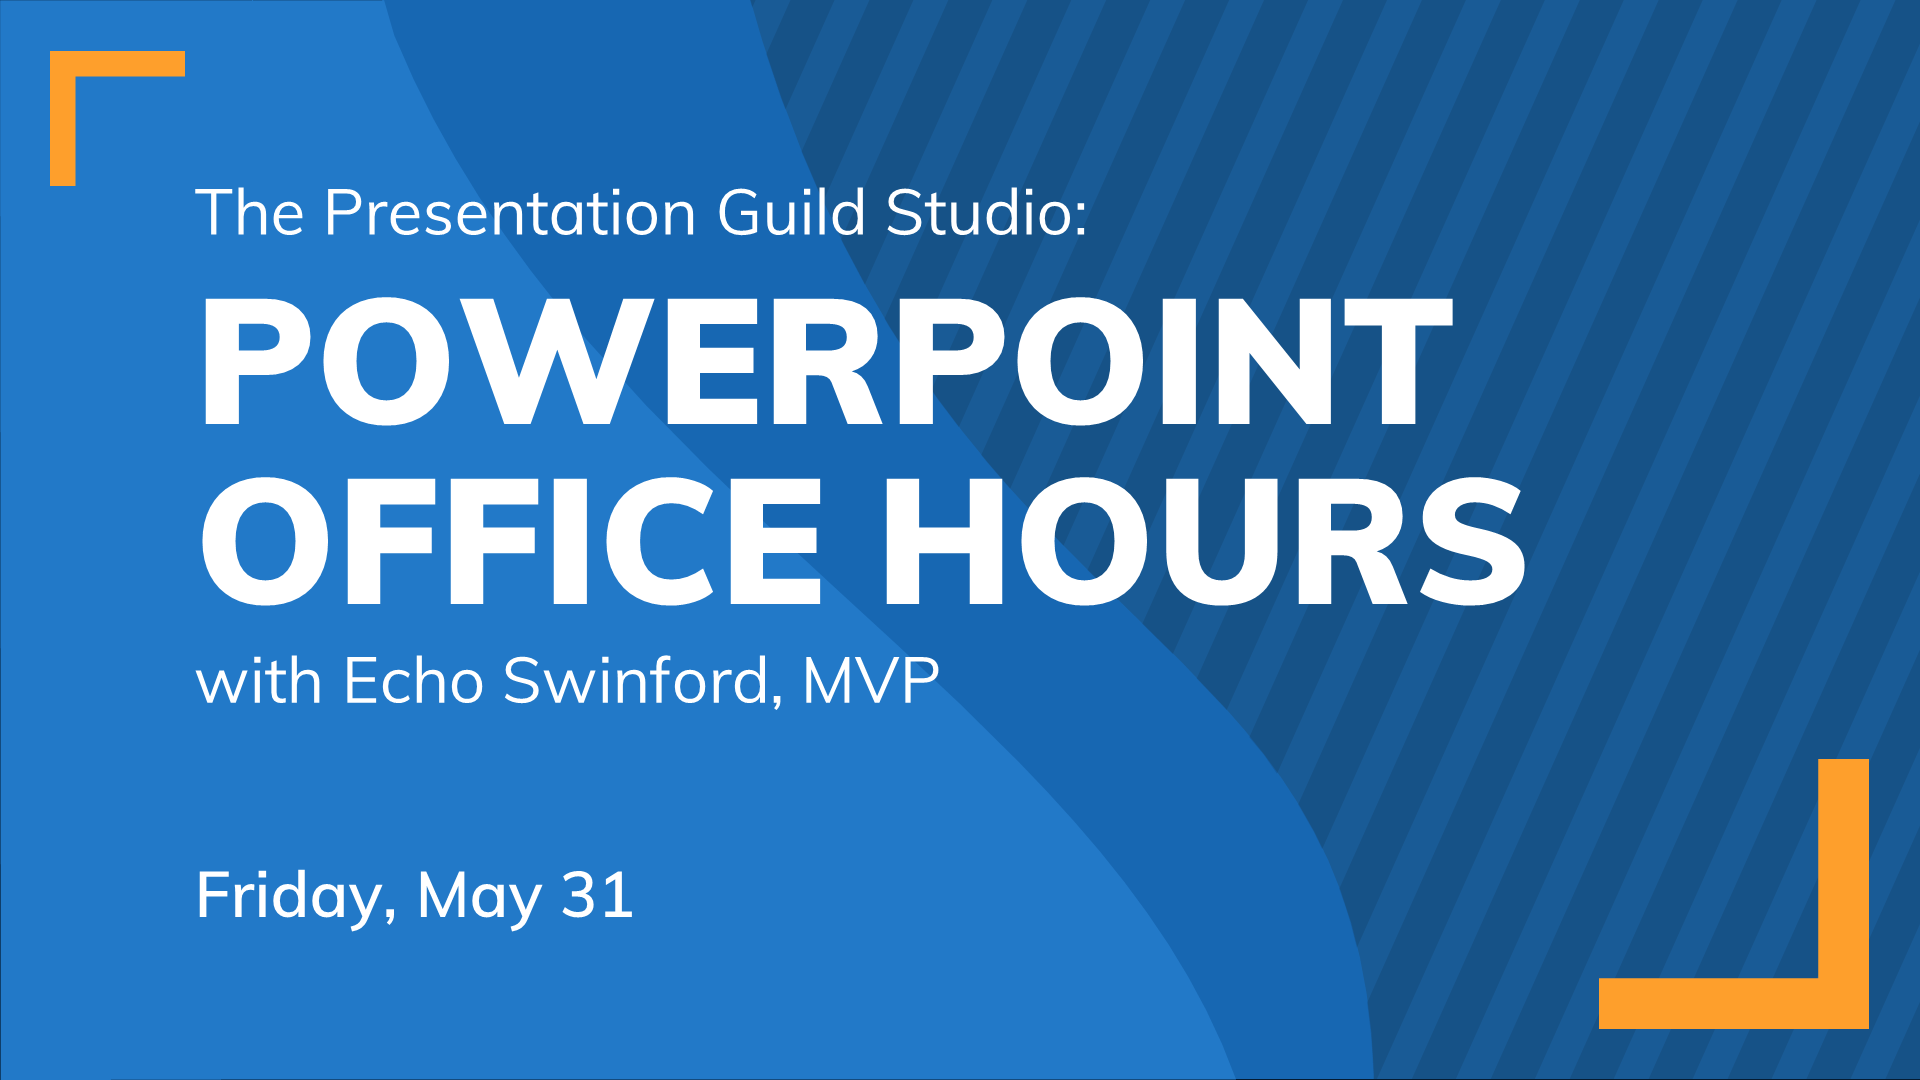 PowerPoint Office Hours:  Friday, May 31